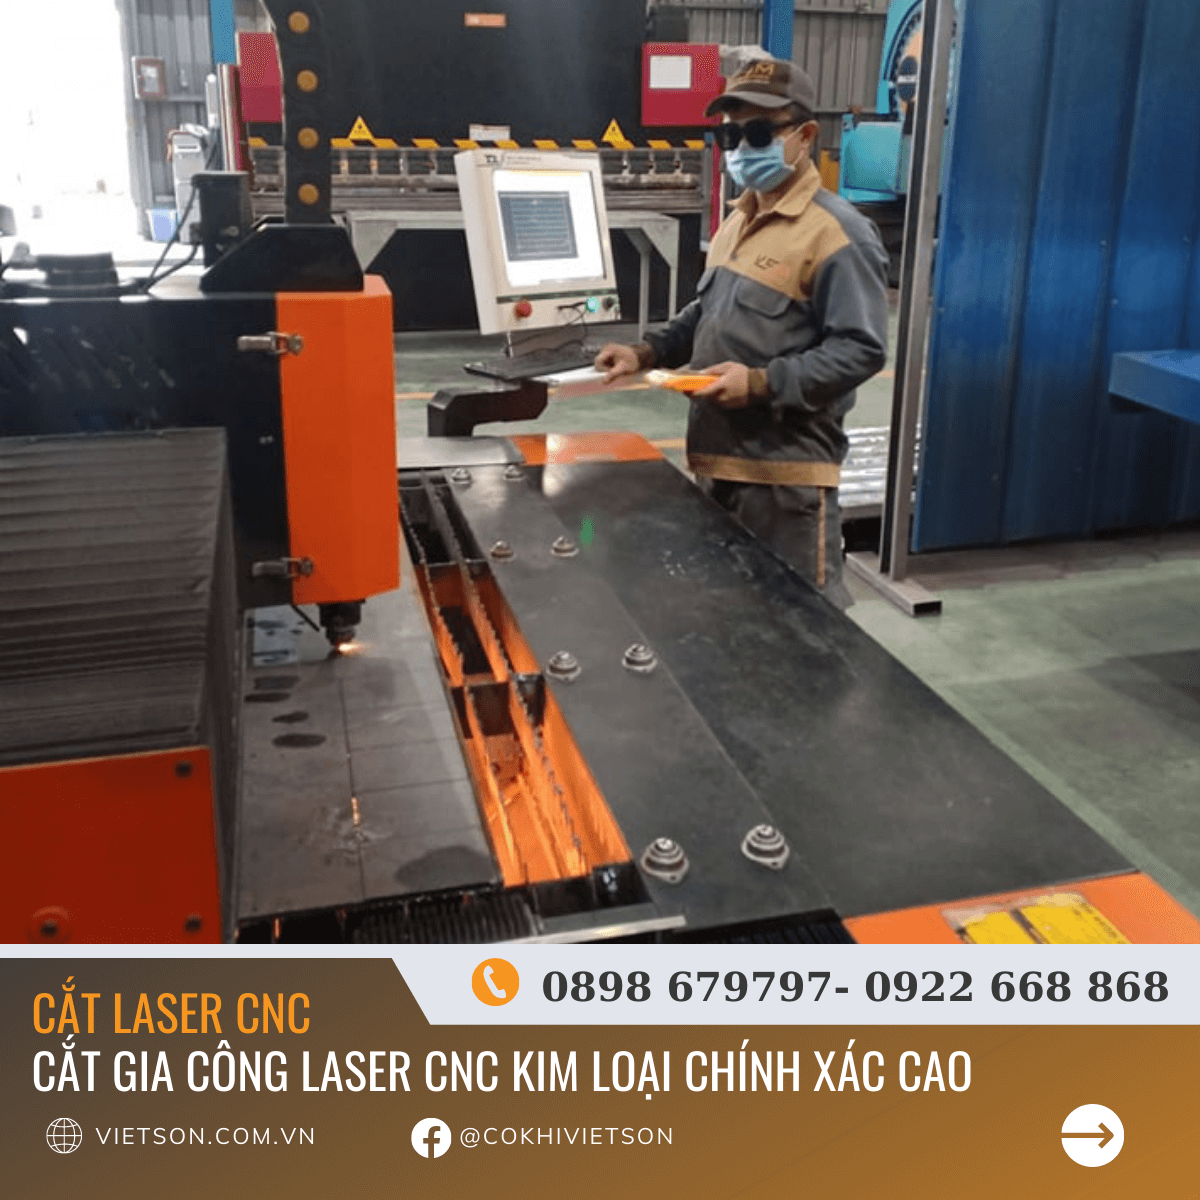 Viet Son Mechanical specializes in CNC laser cutting in Ho Chi Minh City